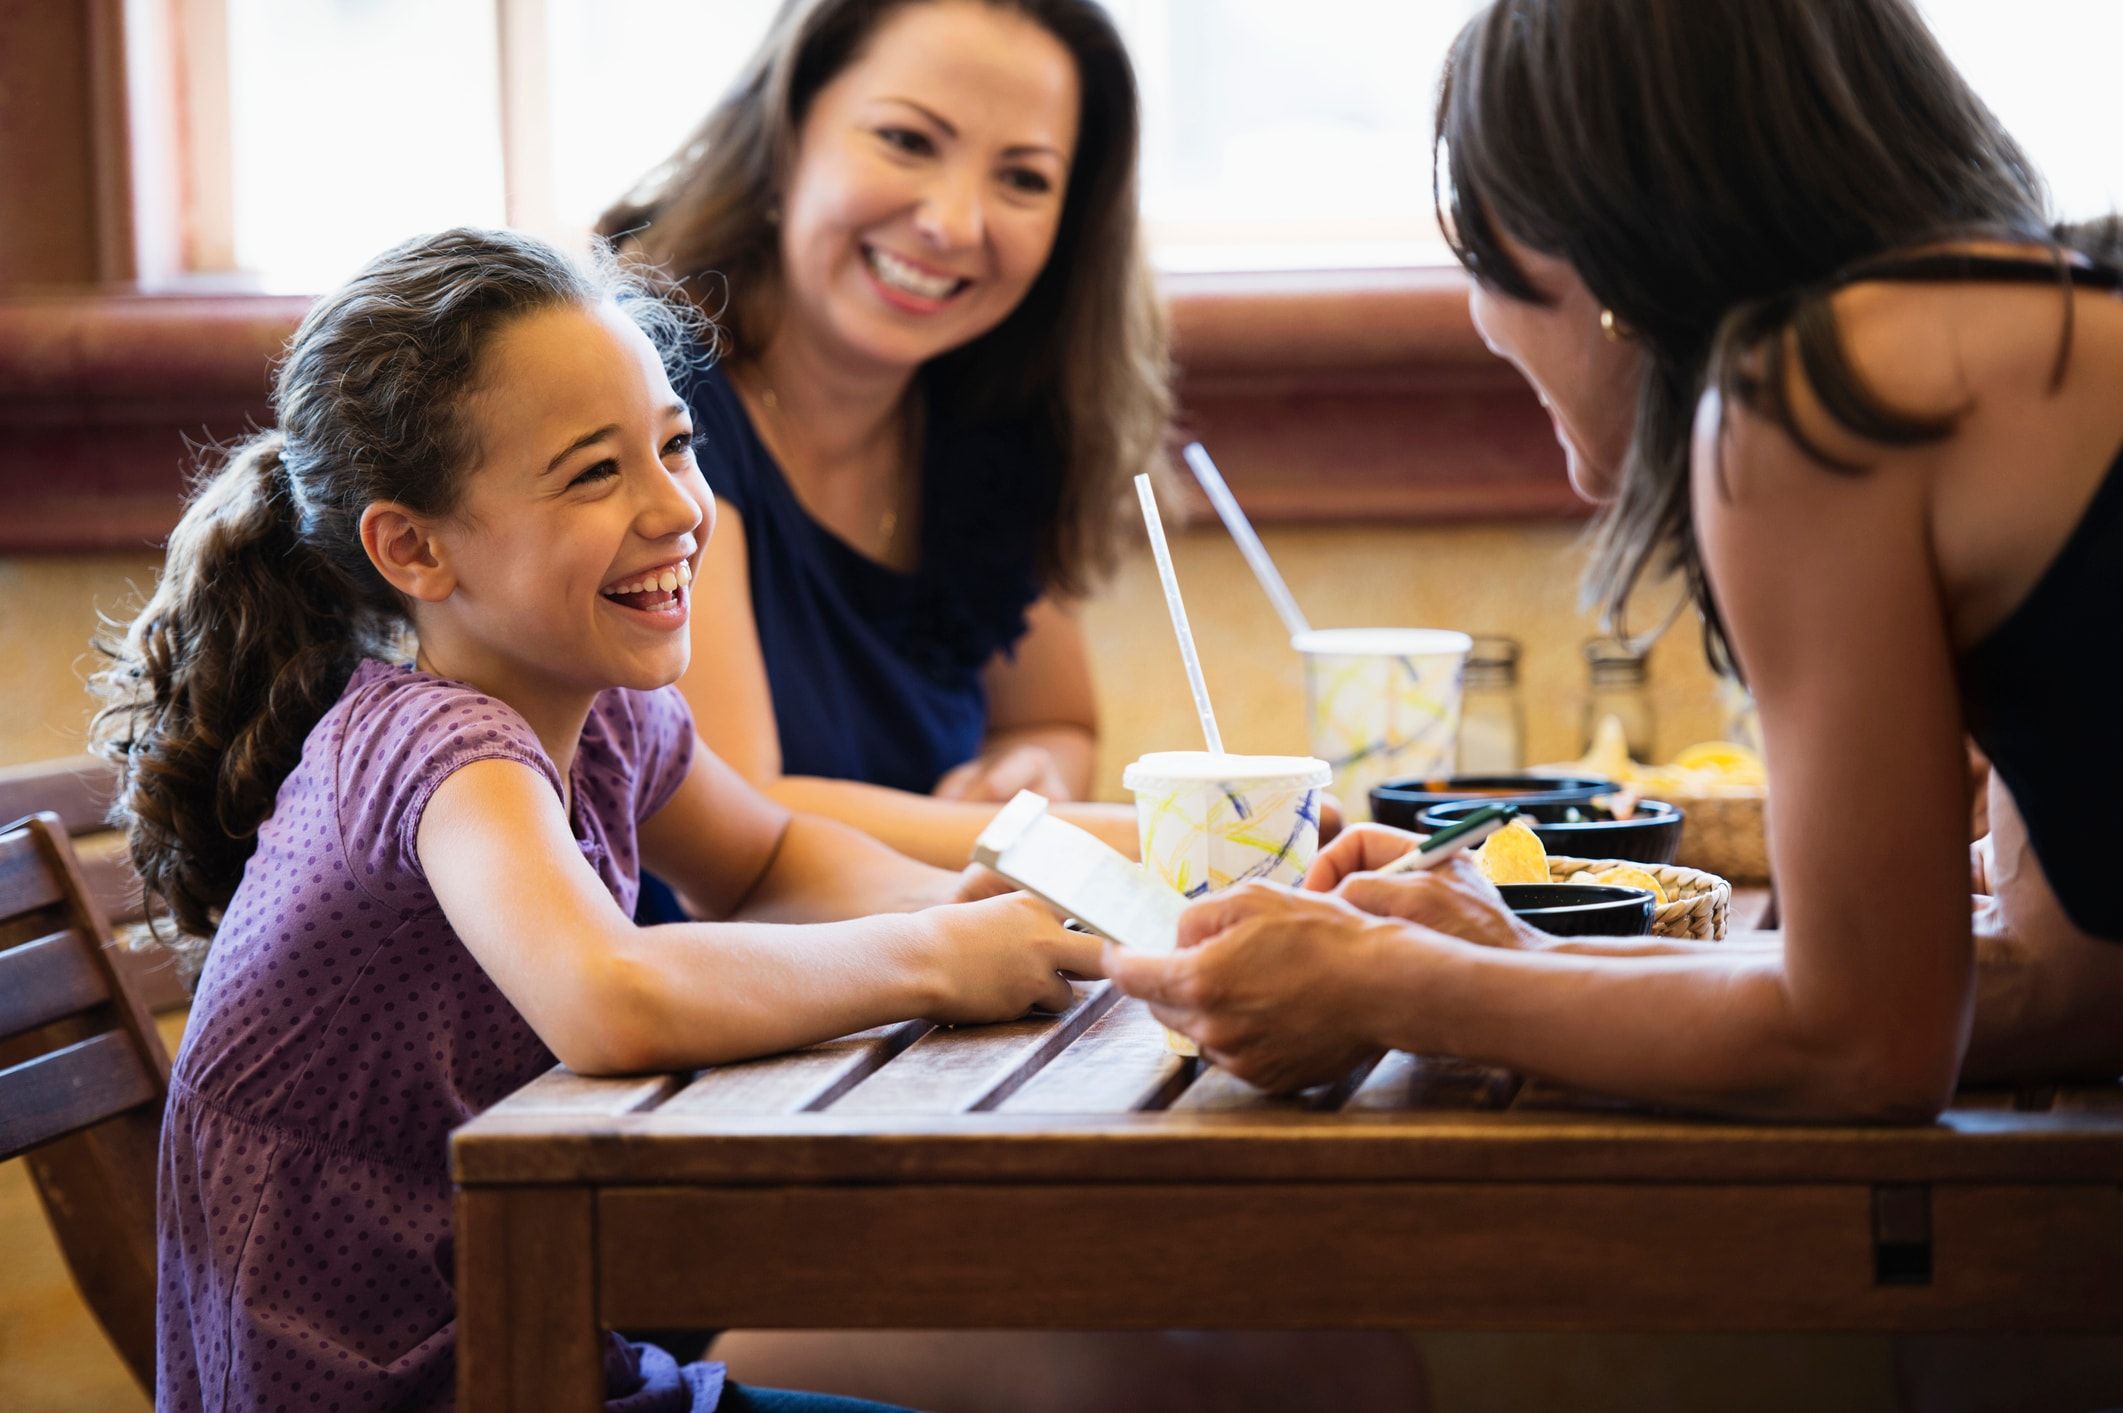 6 tips to help you find the best kid-friendly restaurants near you